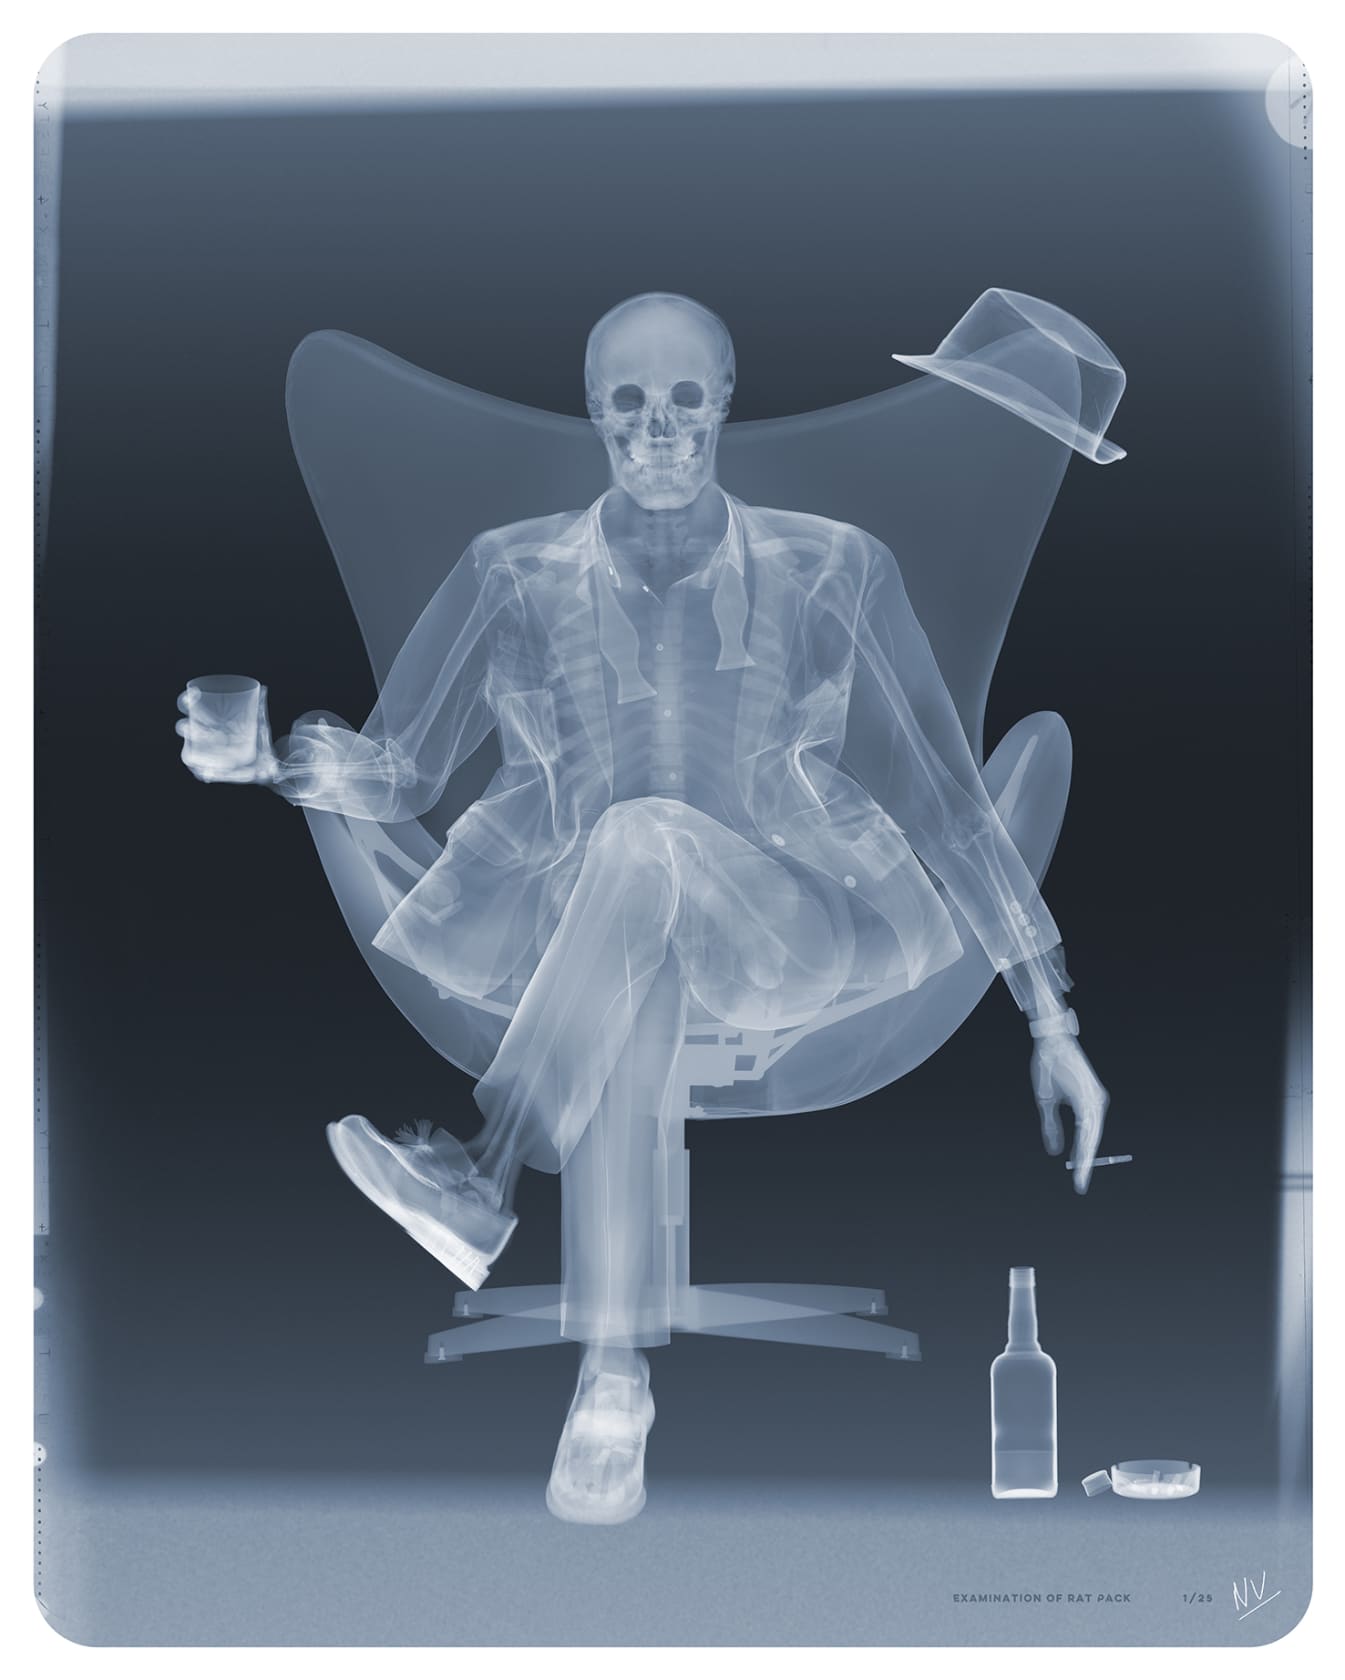 Nick Veasey, Examination of Rat Pack, 2020